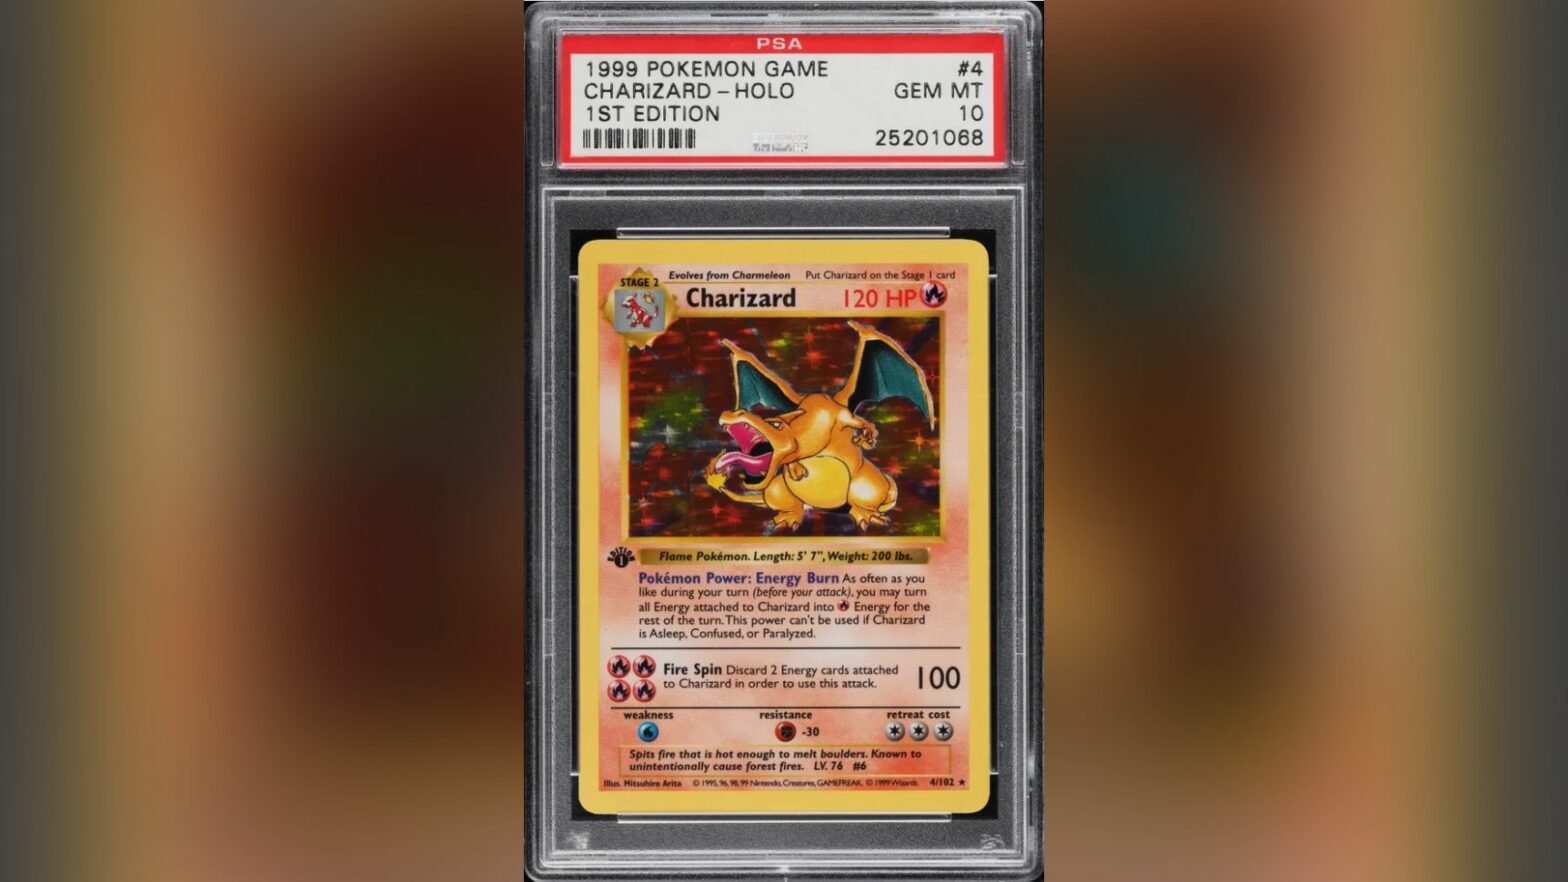 7 most expensive Pokémon cards of all time